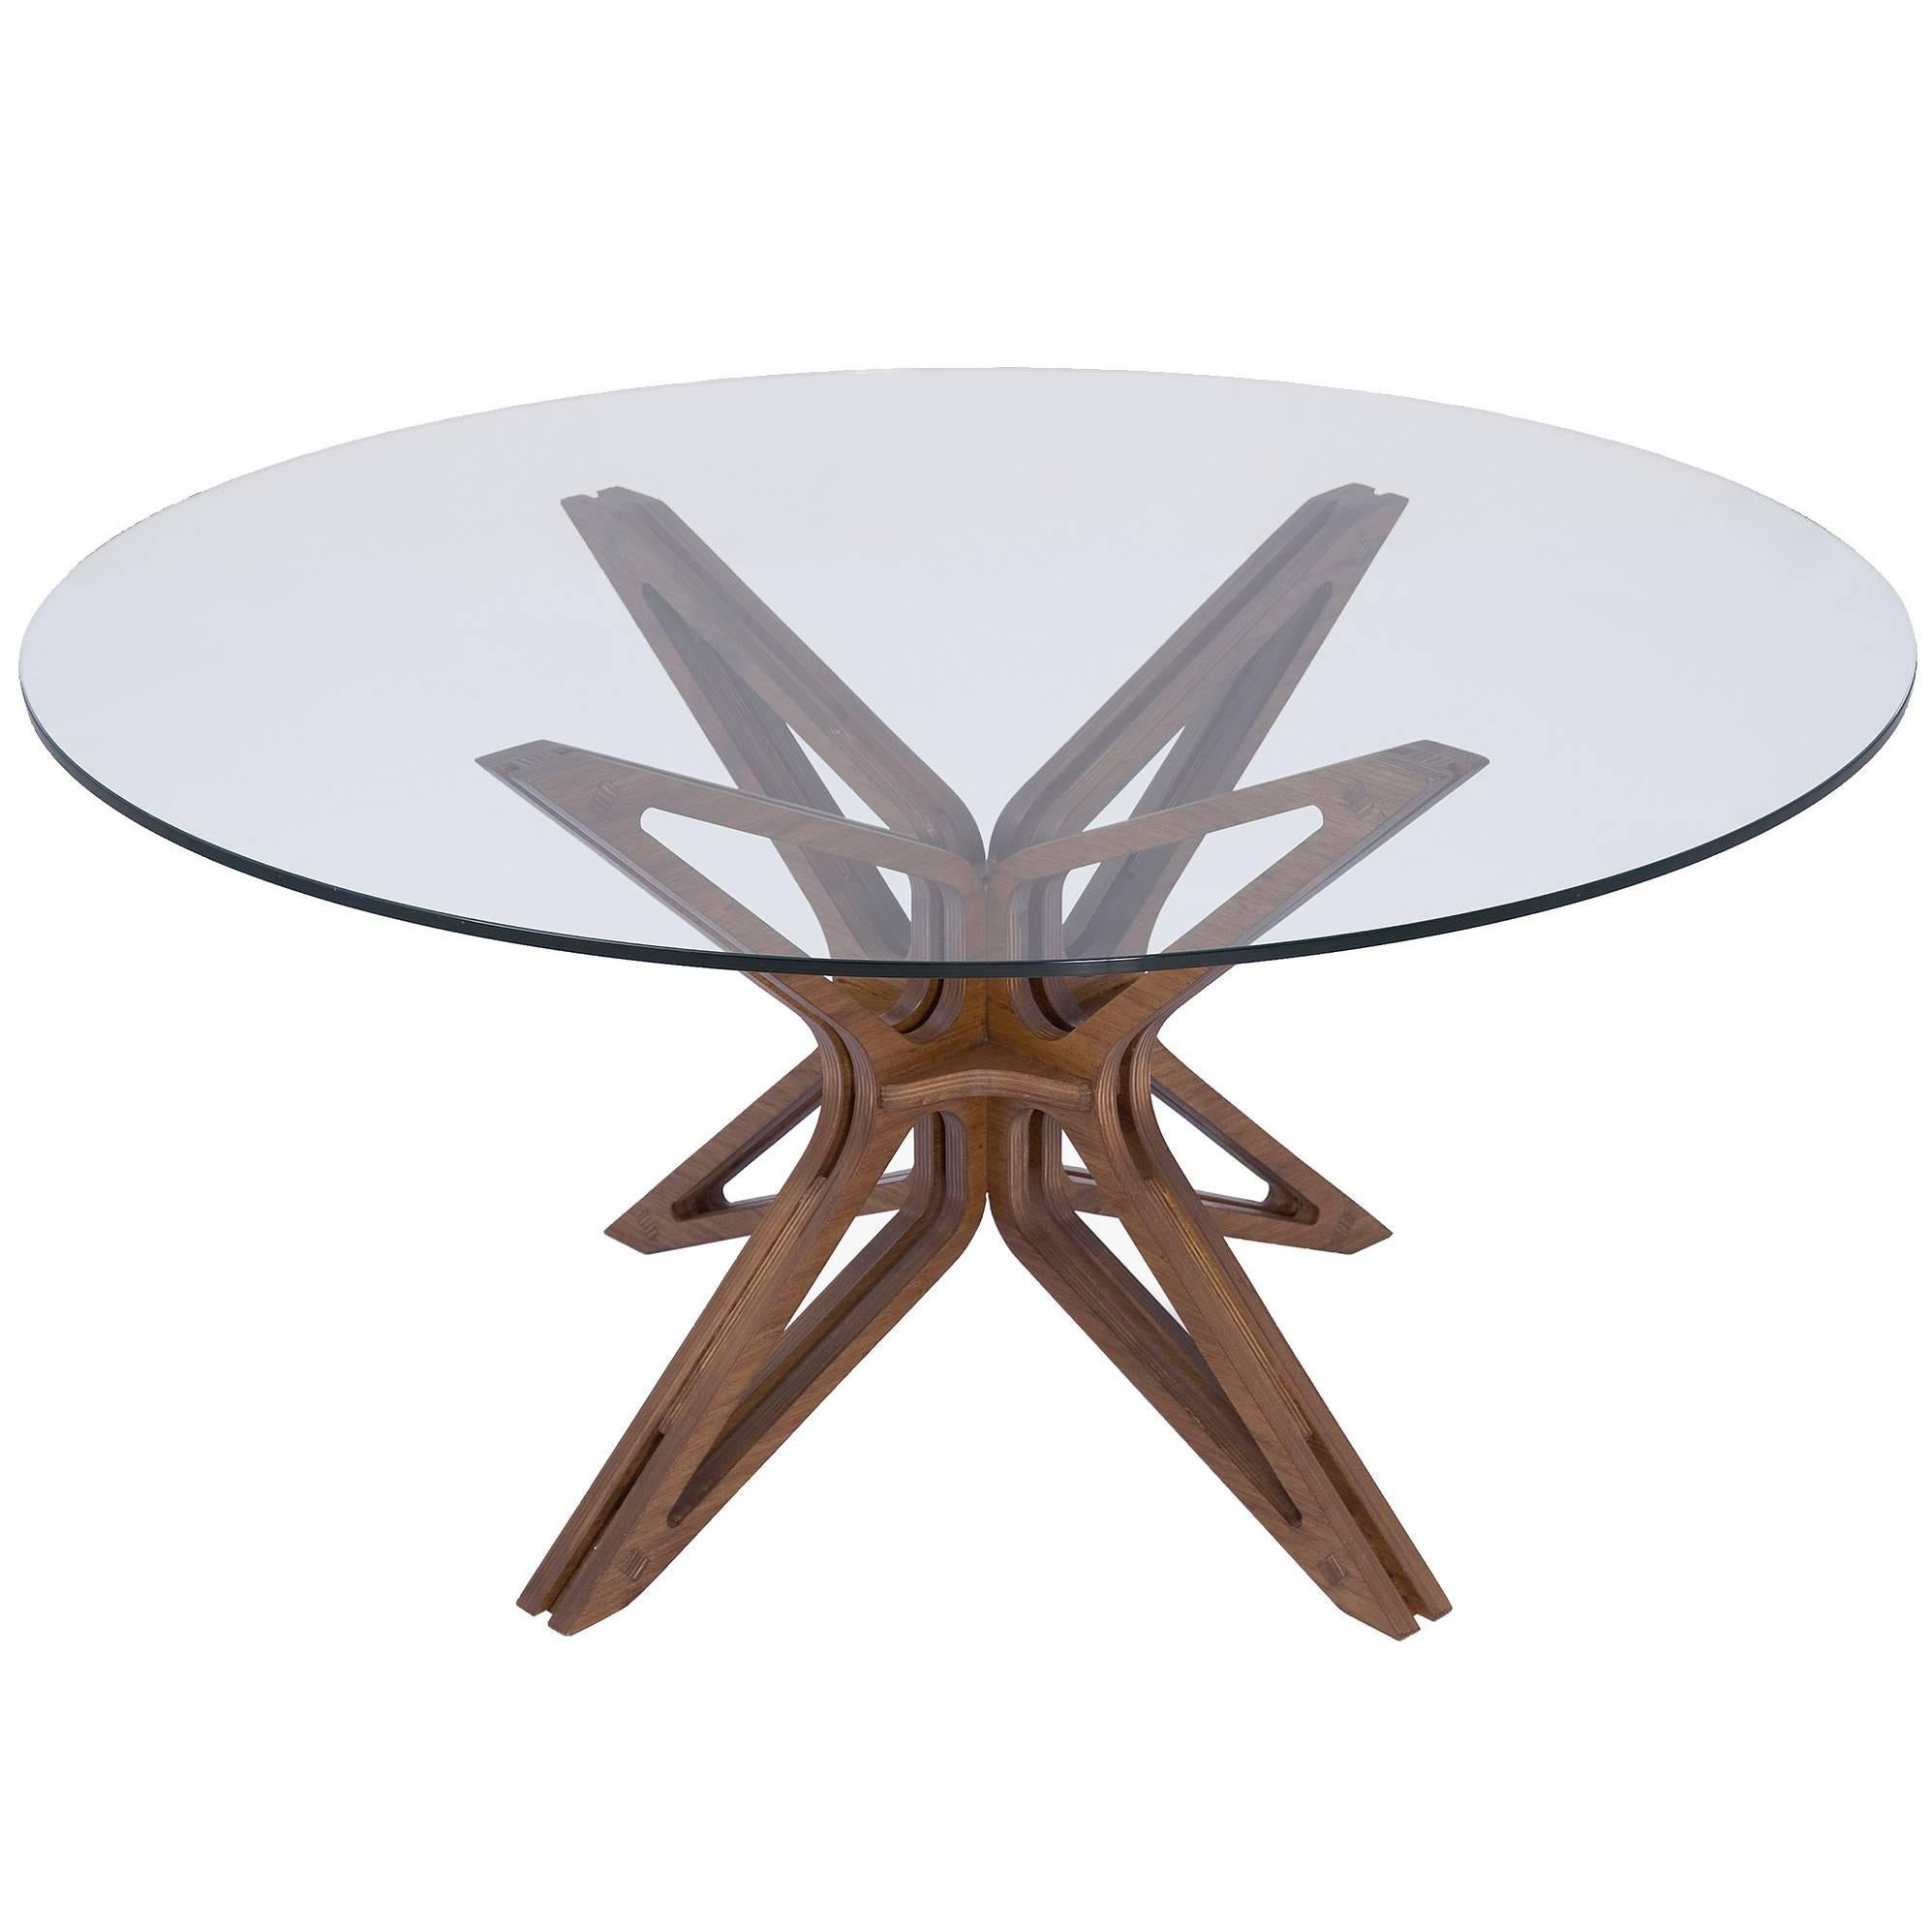 Mariposa Brazilian Contemporary Wood Dining Table by Lattoog